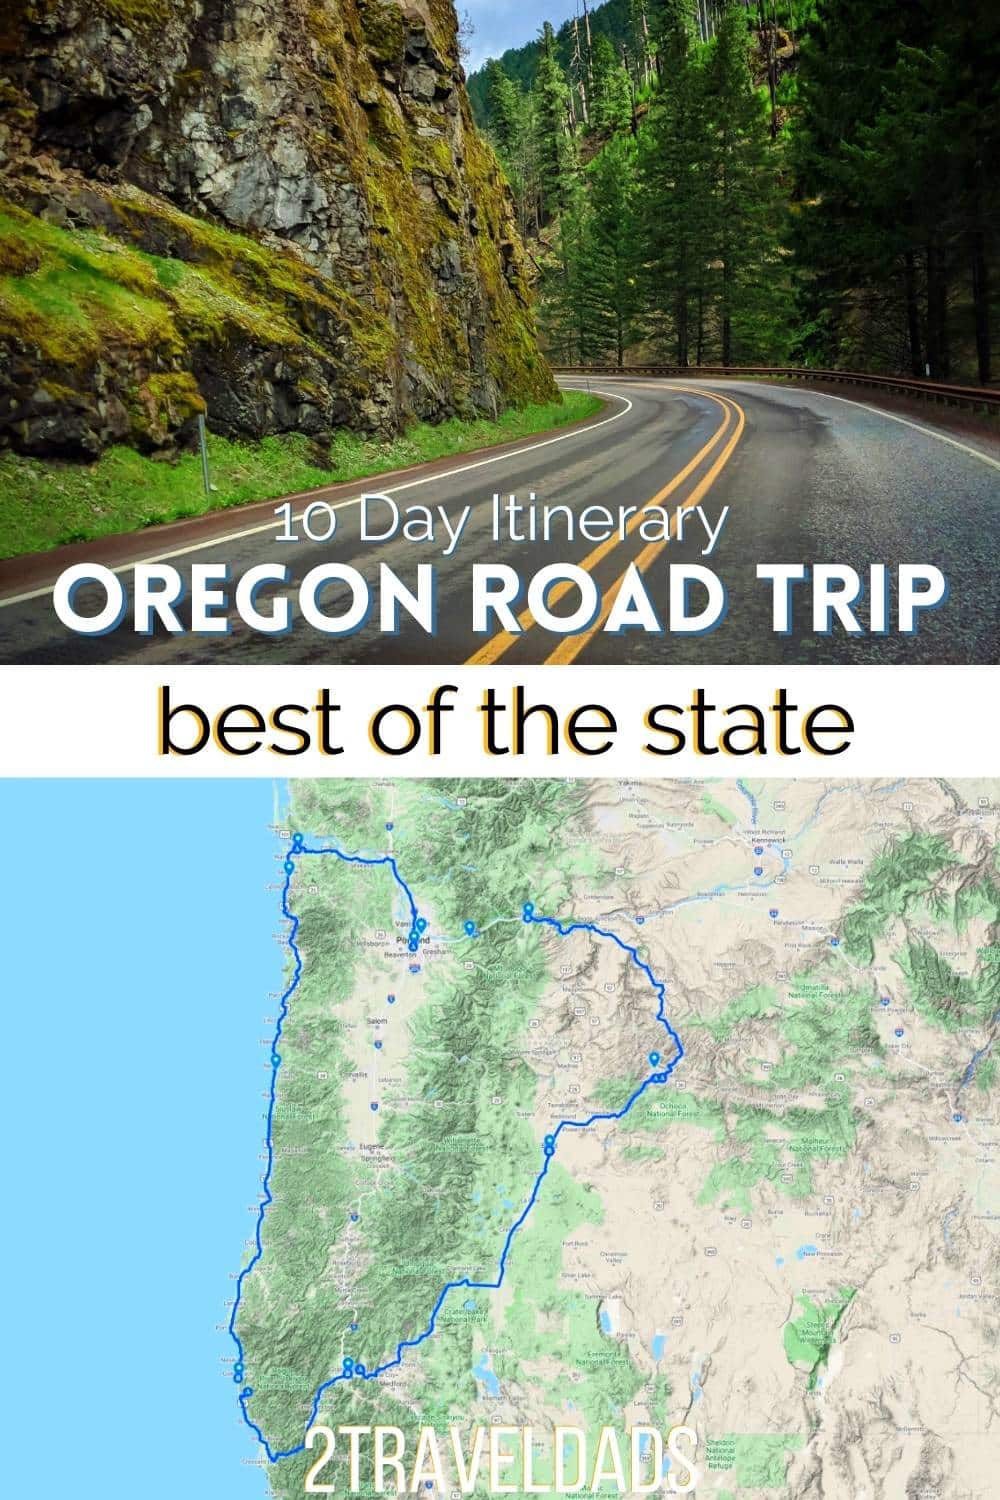 10 Road Trip plan for the best of Oregon, from the rugged Oregon Coast to the mountain waterfalls and the colorful high desert. Oregon's best sights in 10 days of epic road trip.